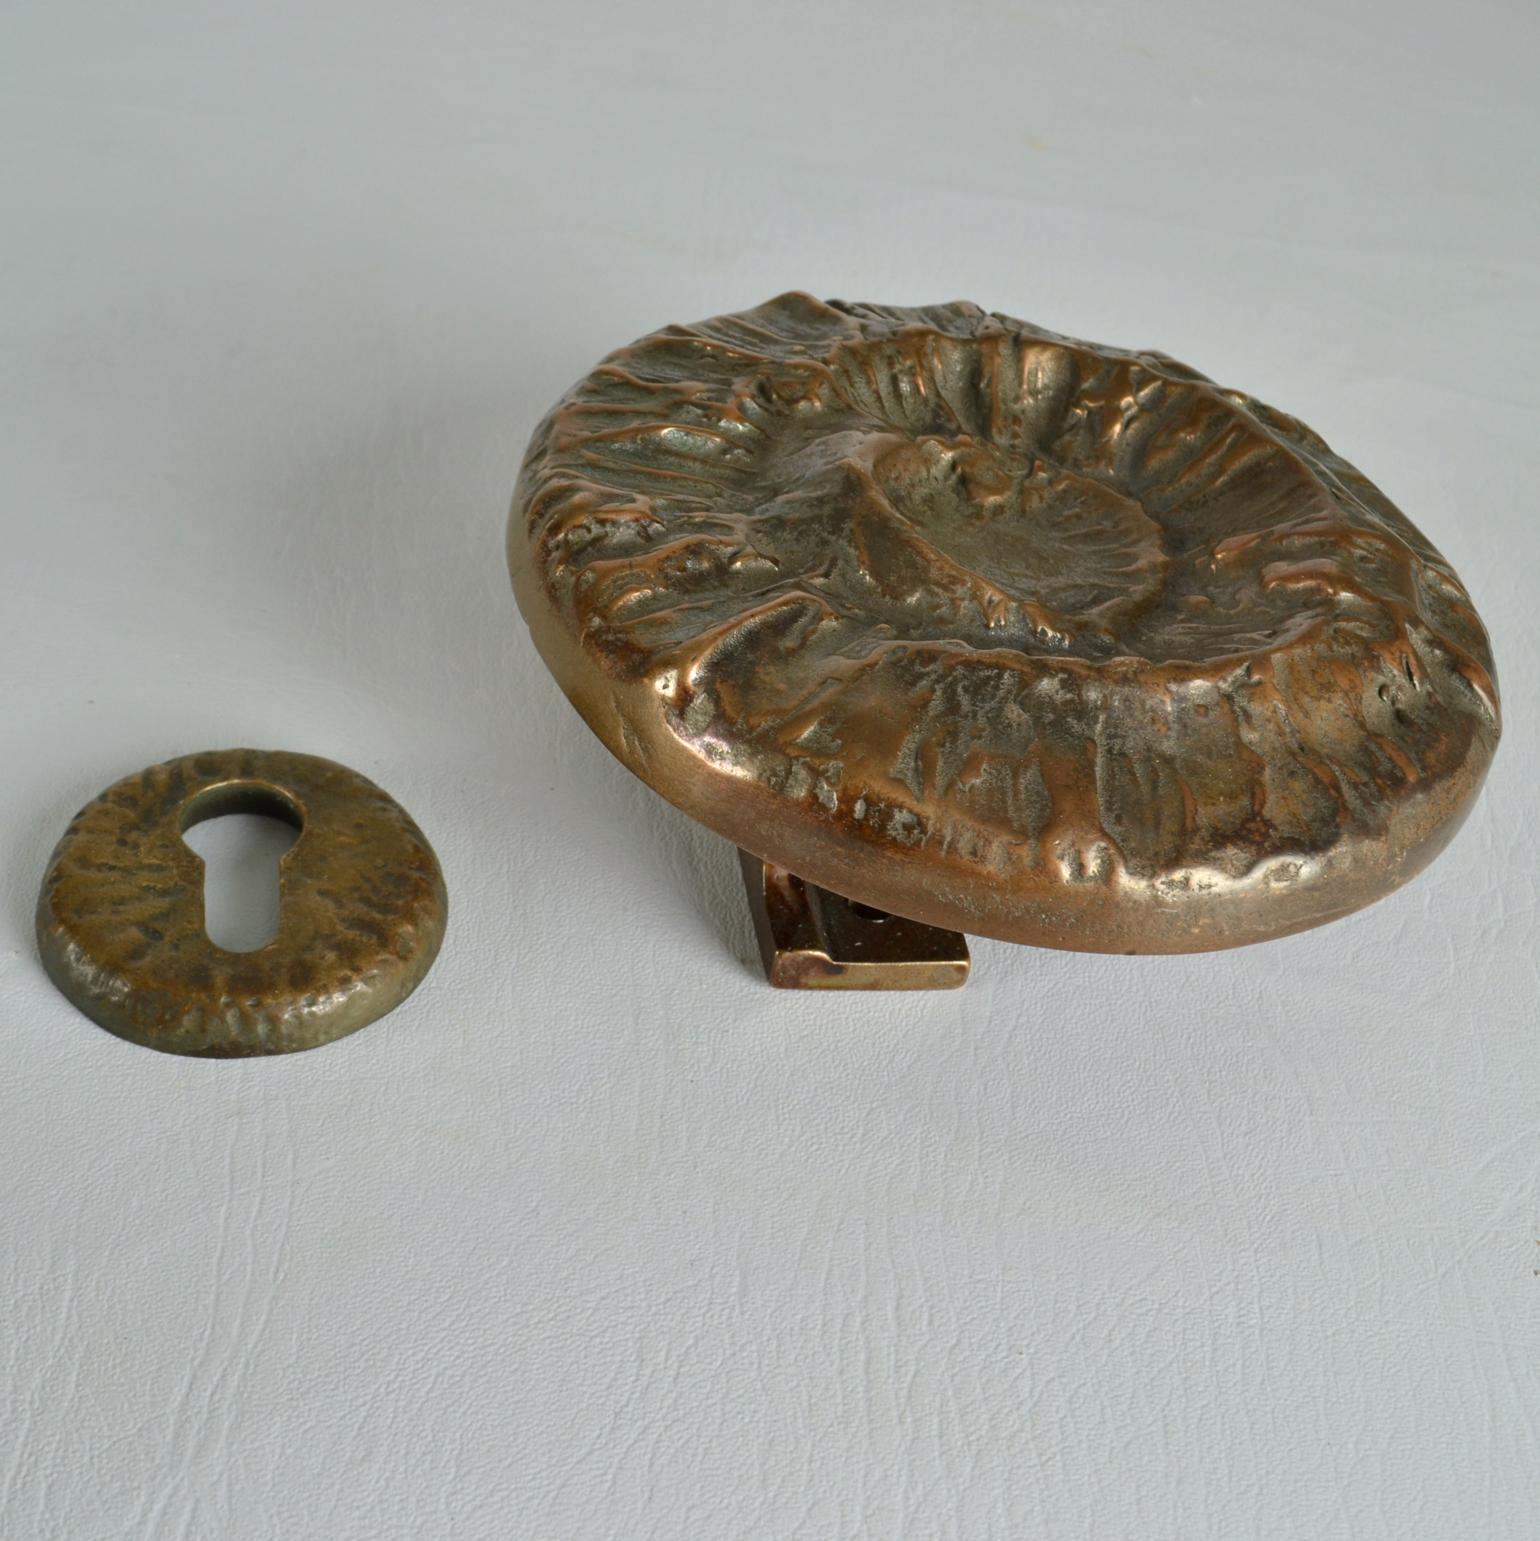 Cast Architectural Pair of Round Bronze Push Pull Relief Door Handles and Keyholes